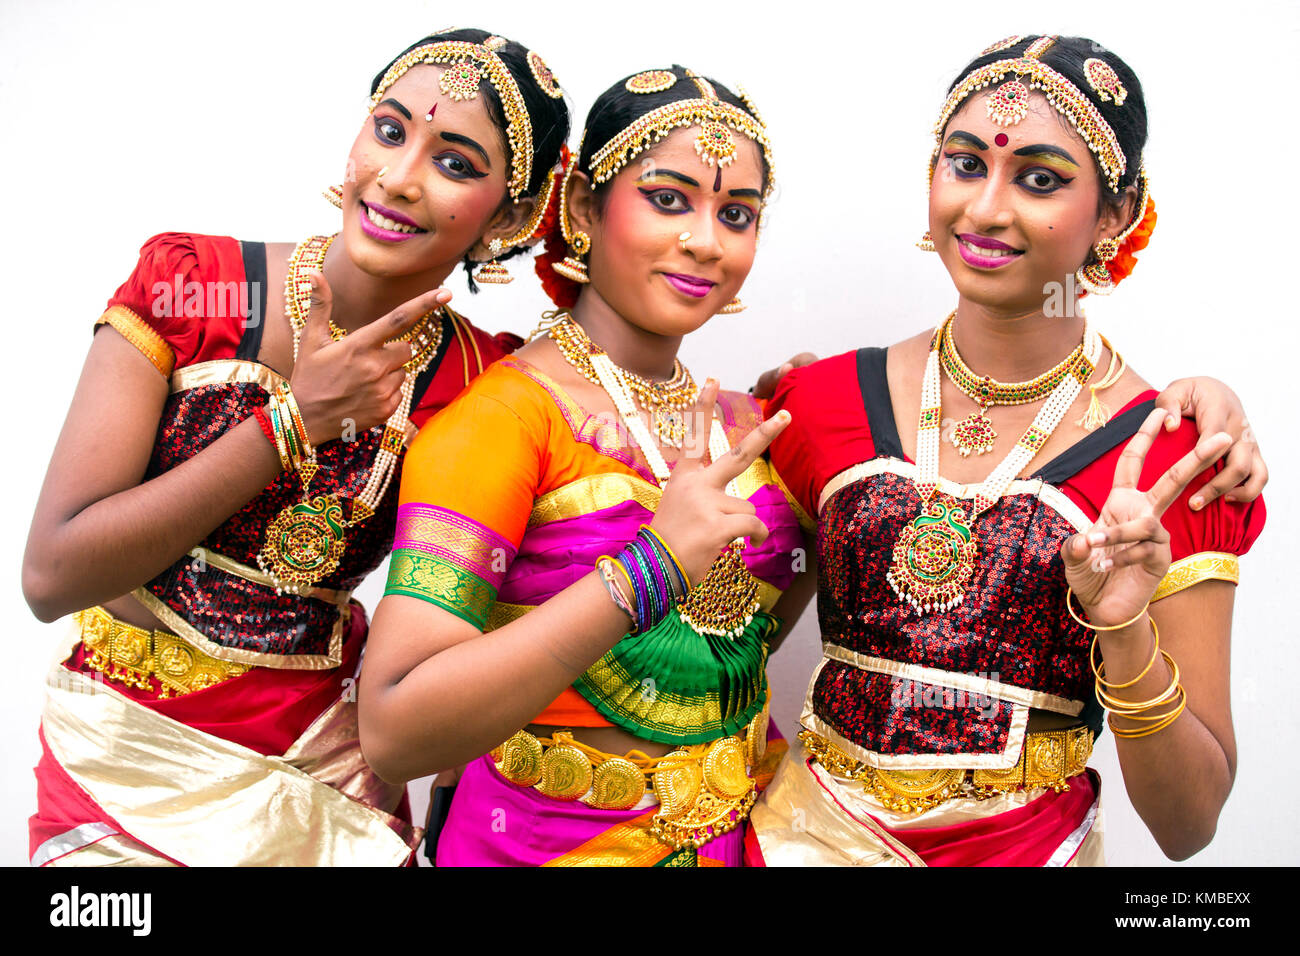 Portrait of young adult Indian performers in traditional costume during the Thaipusam festival and celebrations in Georgetown, Penang, Malaysia. Stock Photo